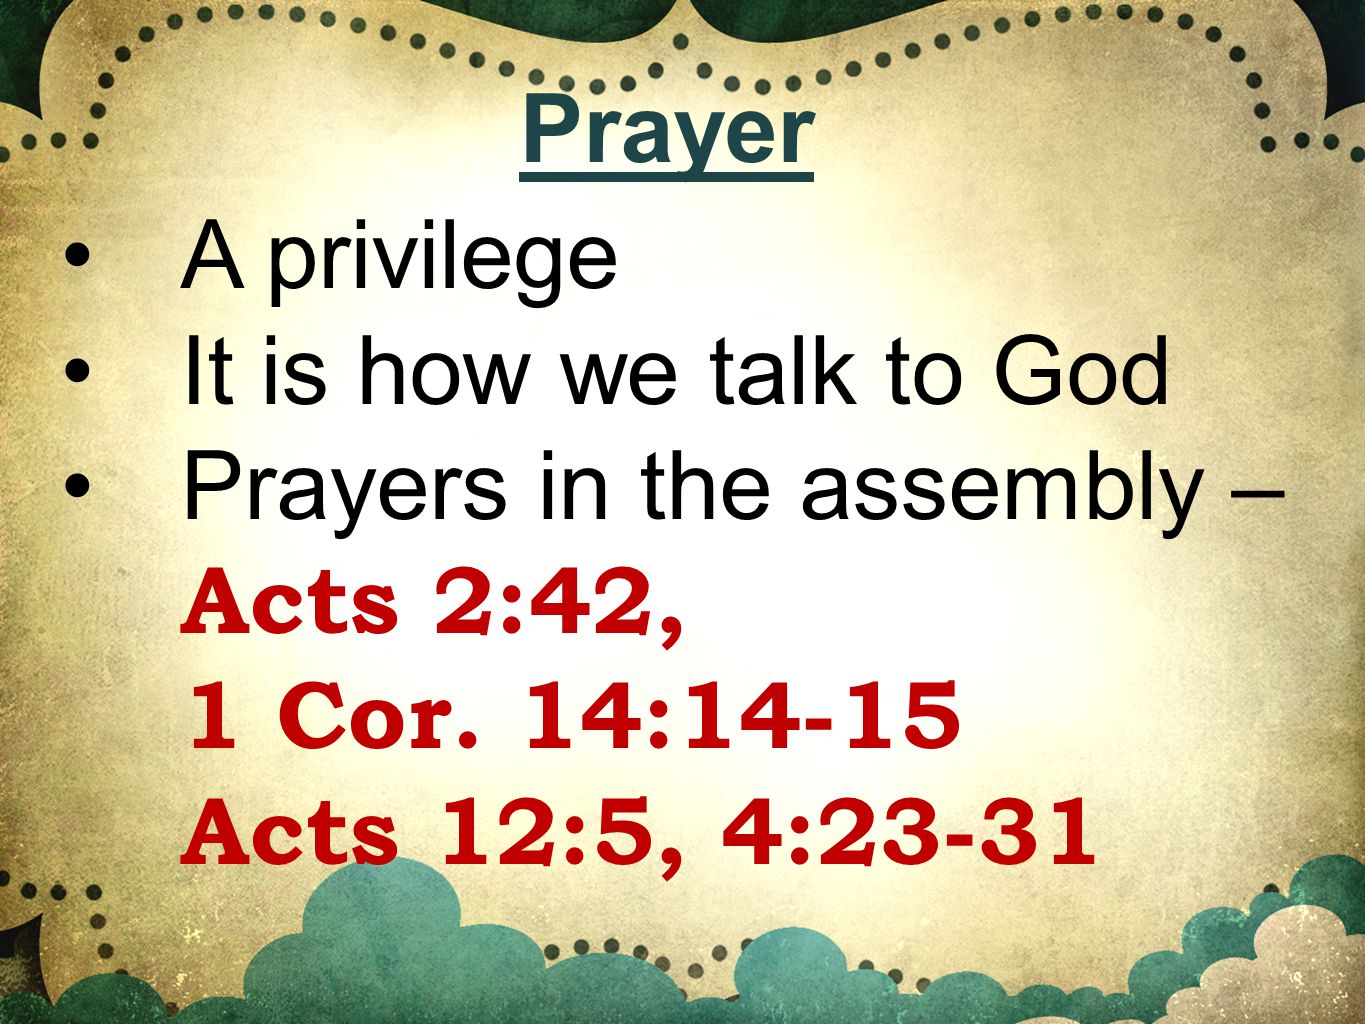 A privilege It is how we talk to God Prayers in the assembly – Acts 2:42, 1 Cor.